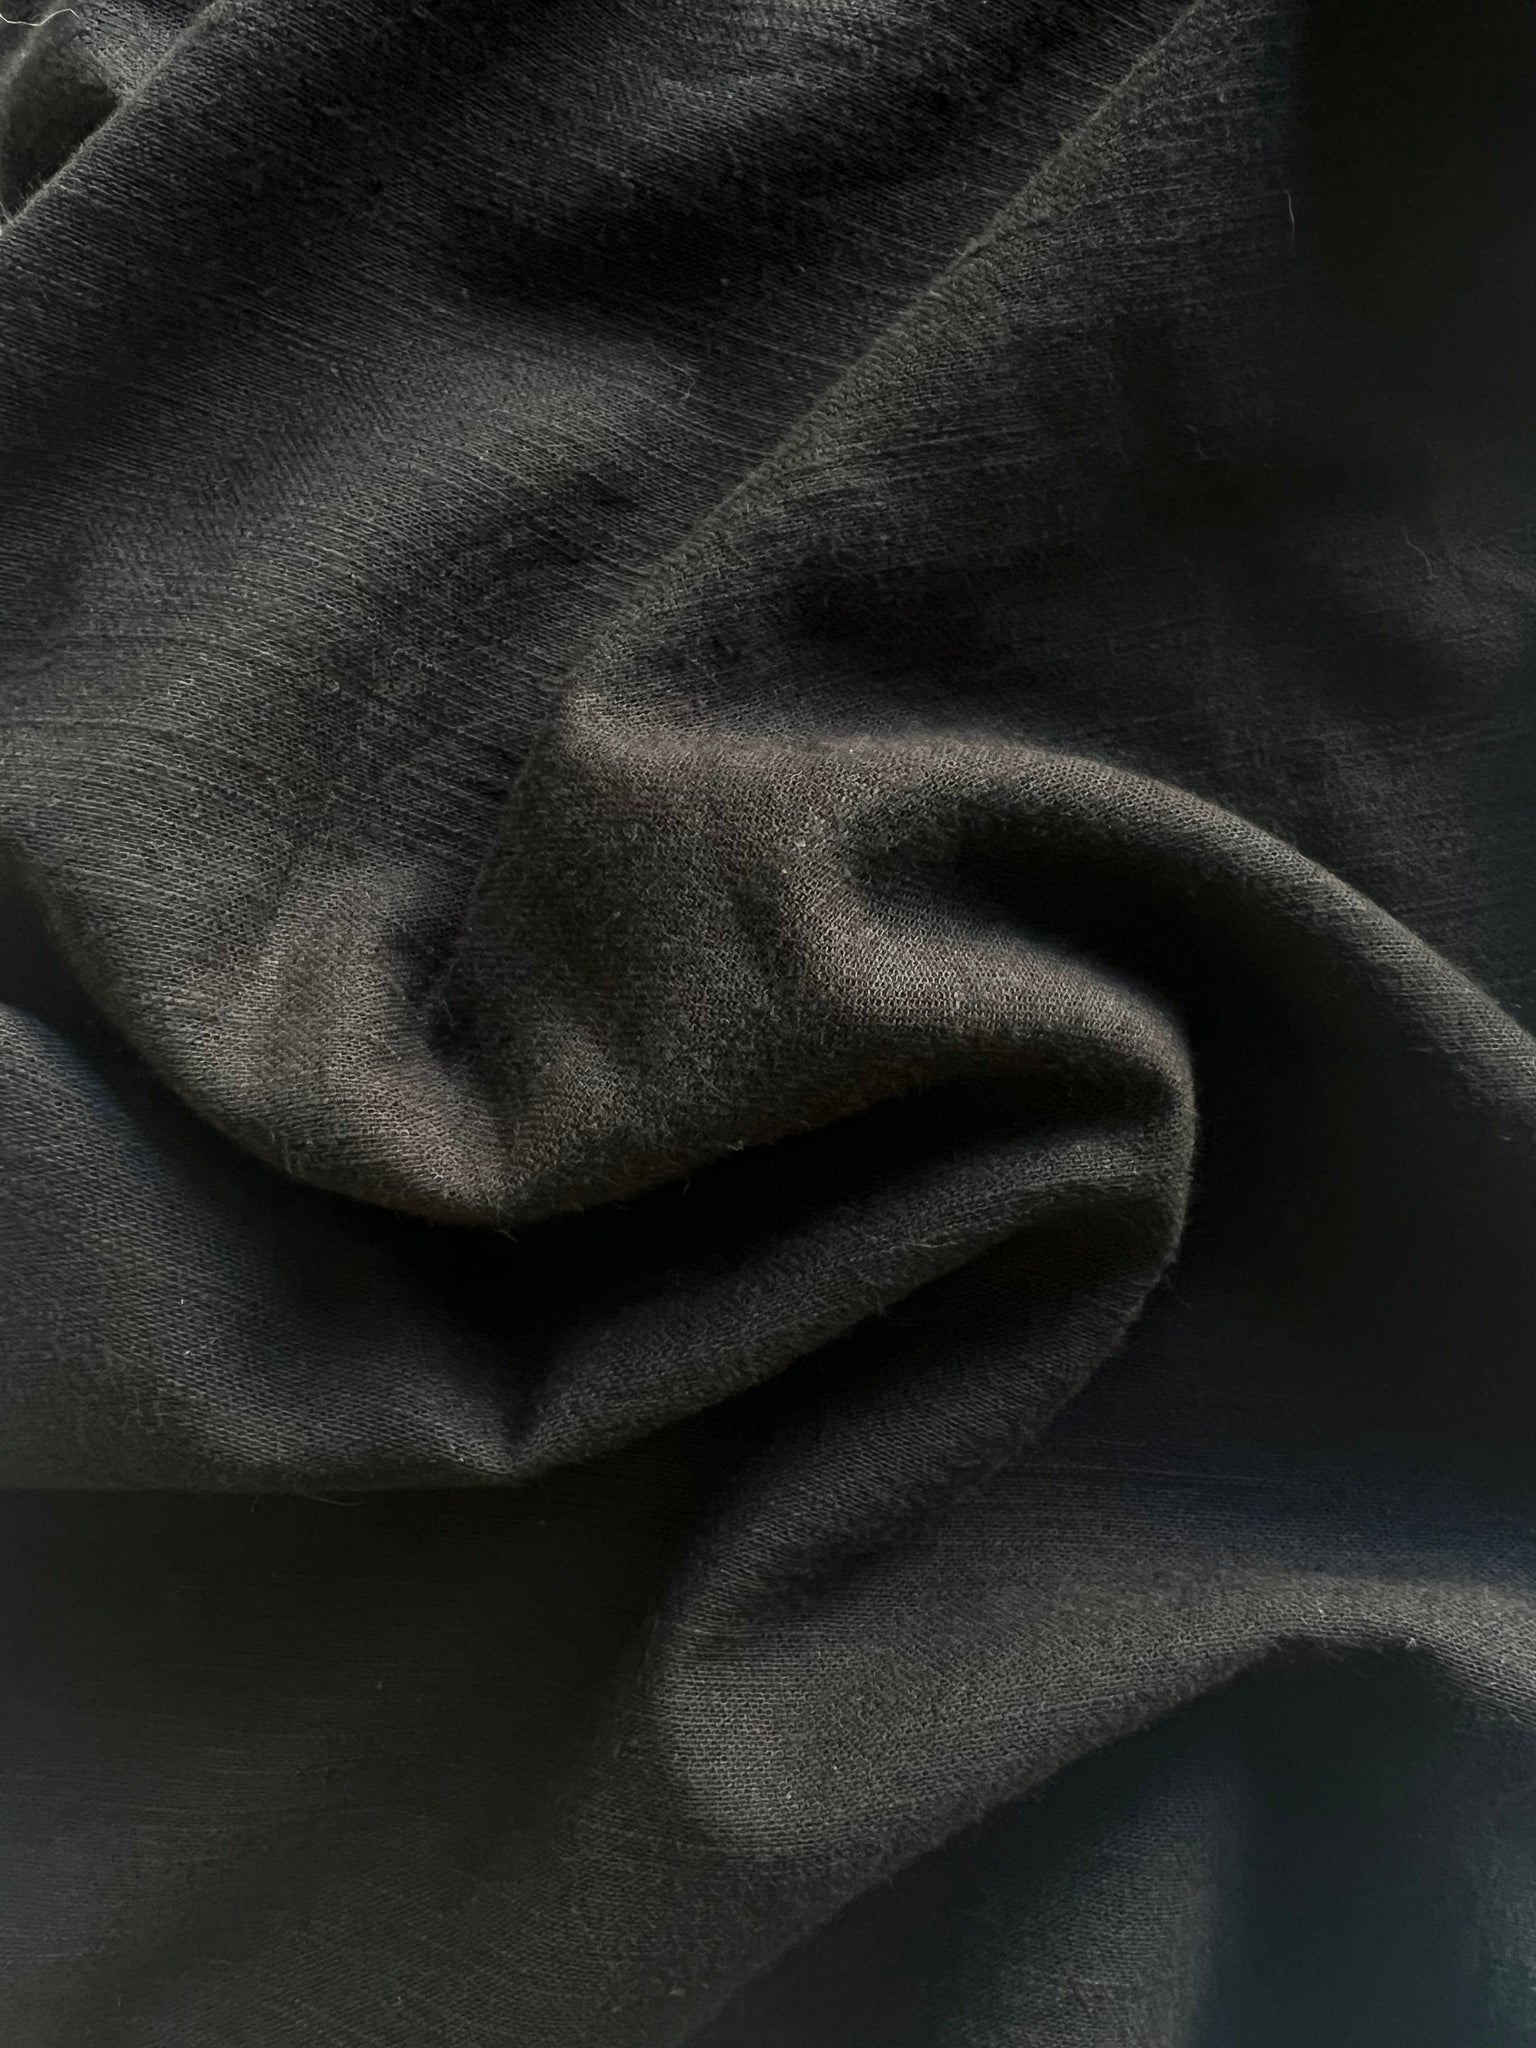 A close up image of a Handcrafted Everyday Top - Black Cotton.